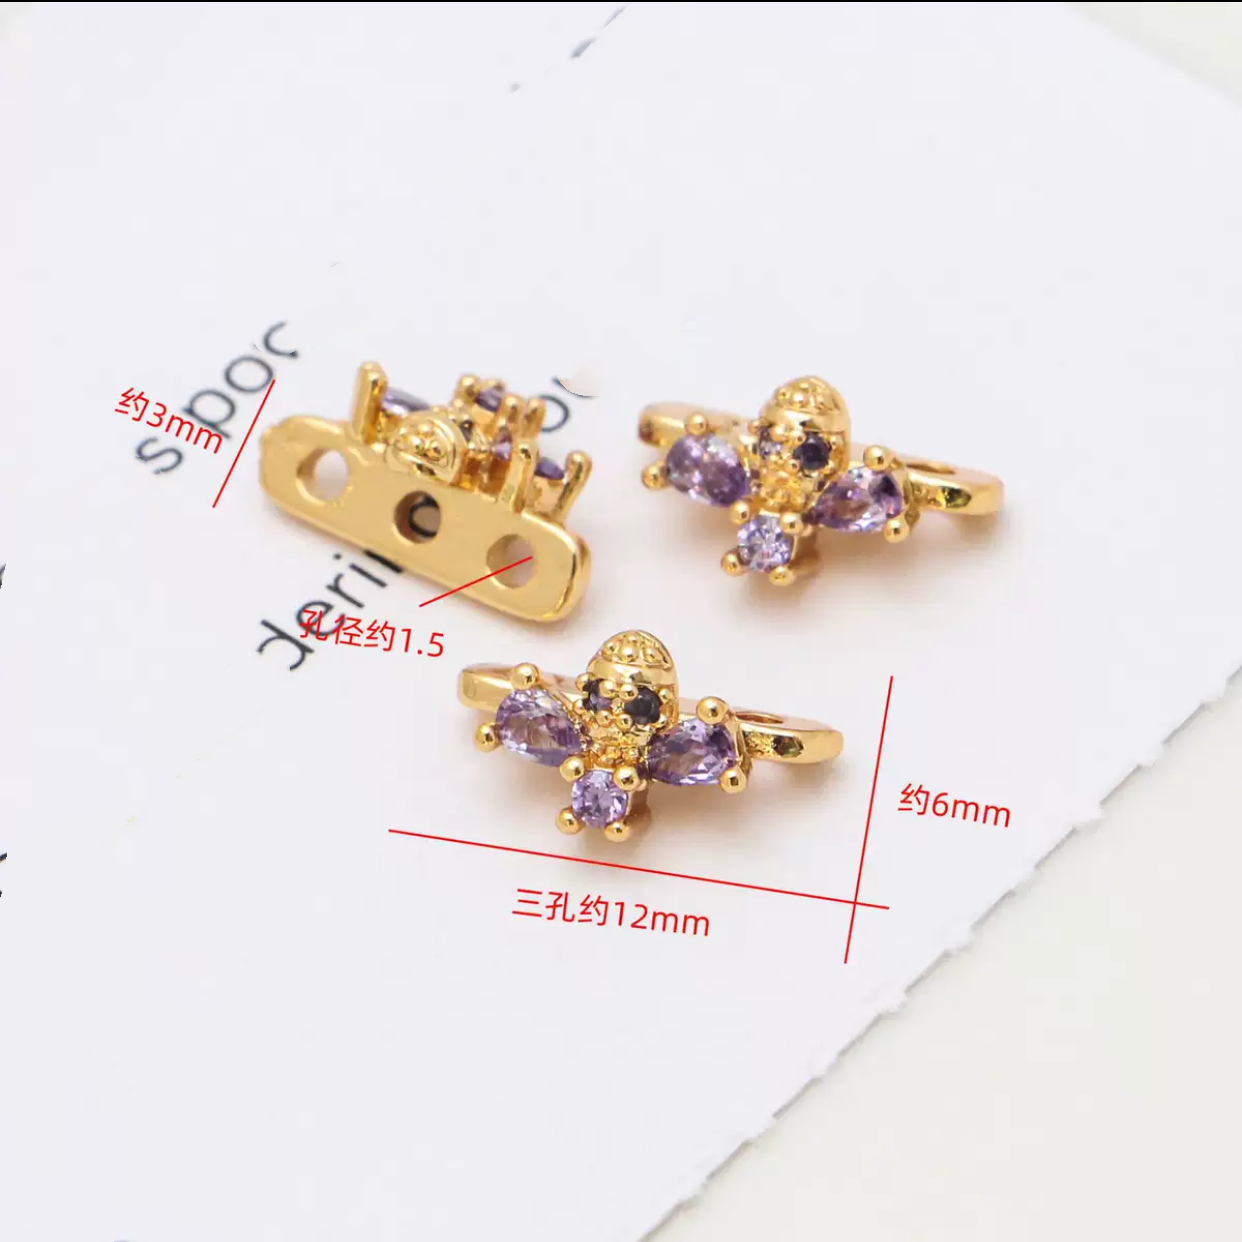 #T6 T7 T8 Three Holes Spacers Charms For DIY Jewelry Accessories